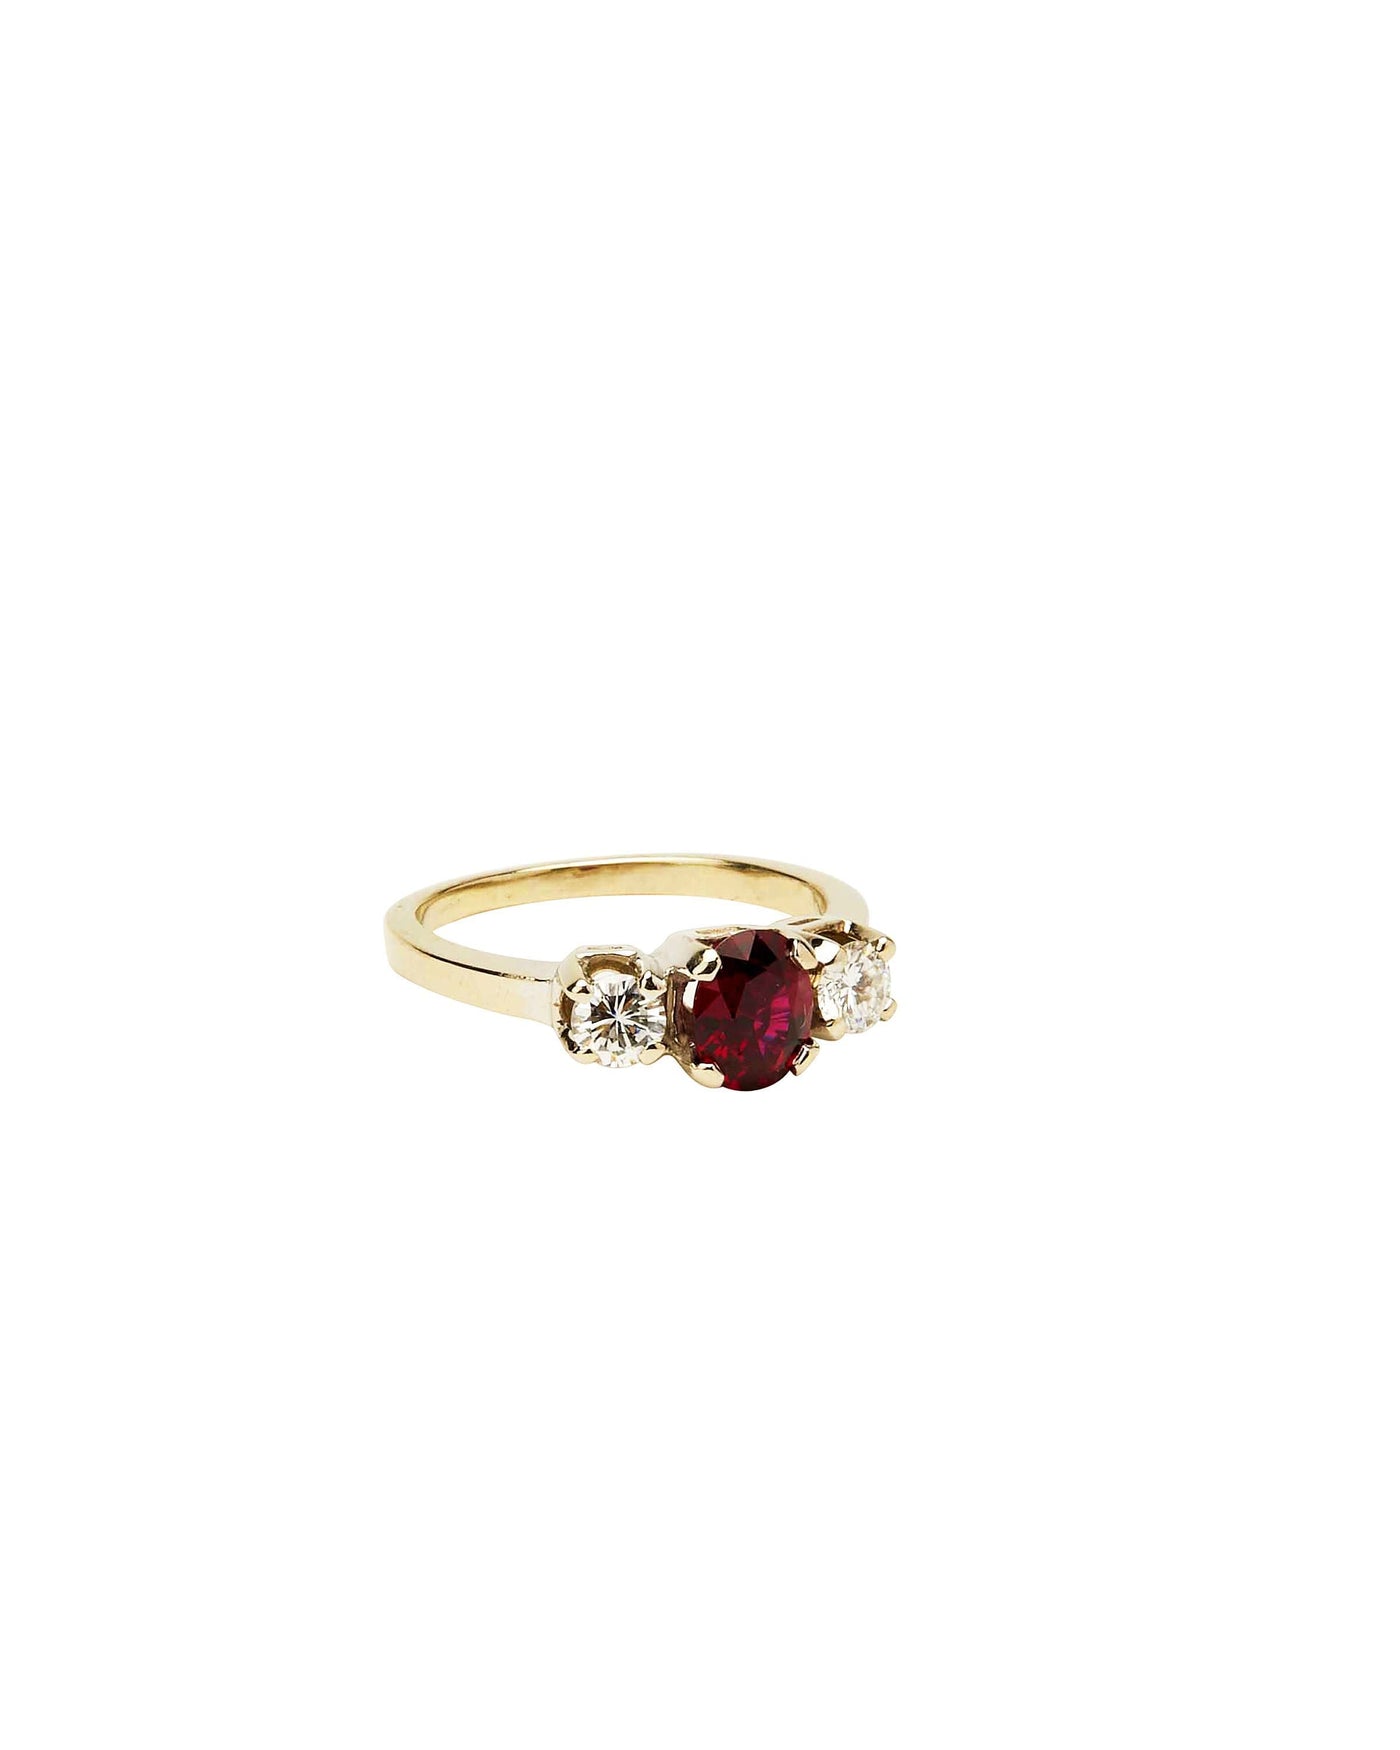 Ruby and Diamond on 14k White Gold